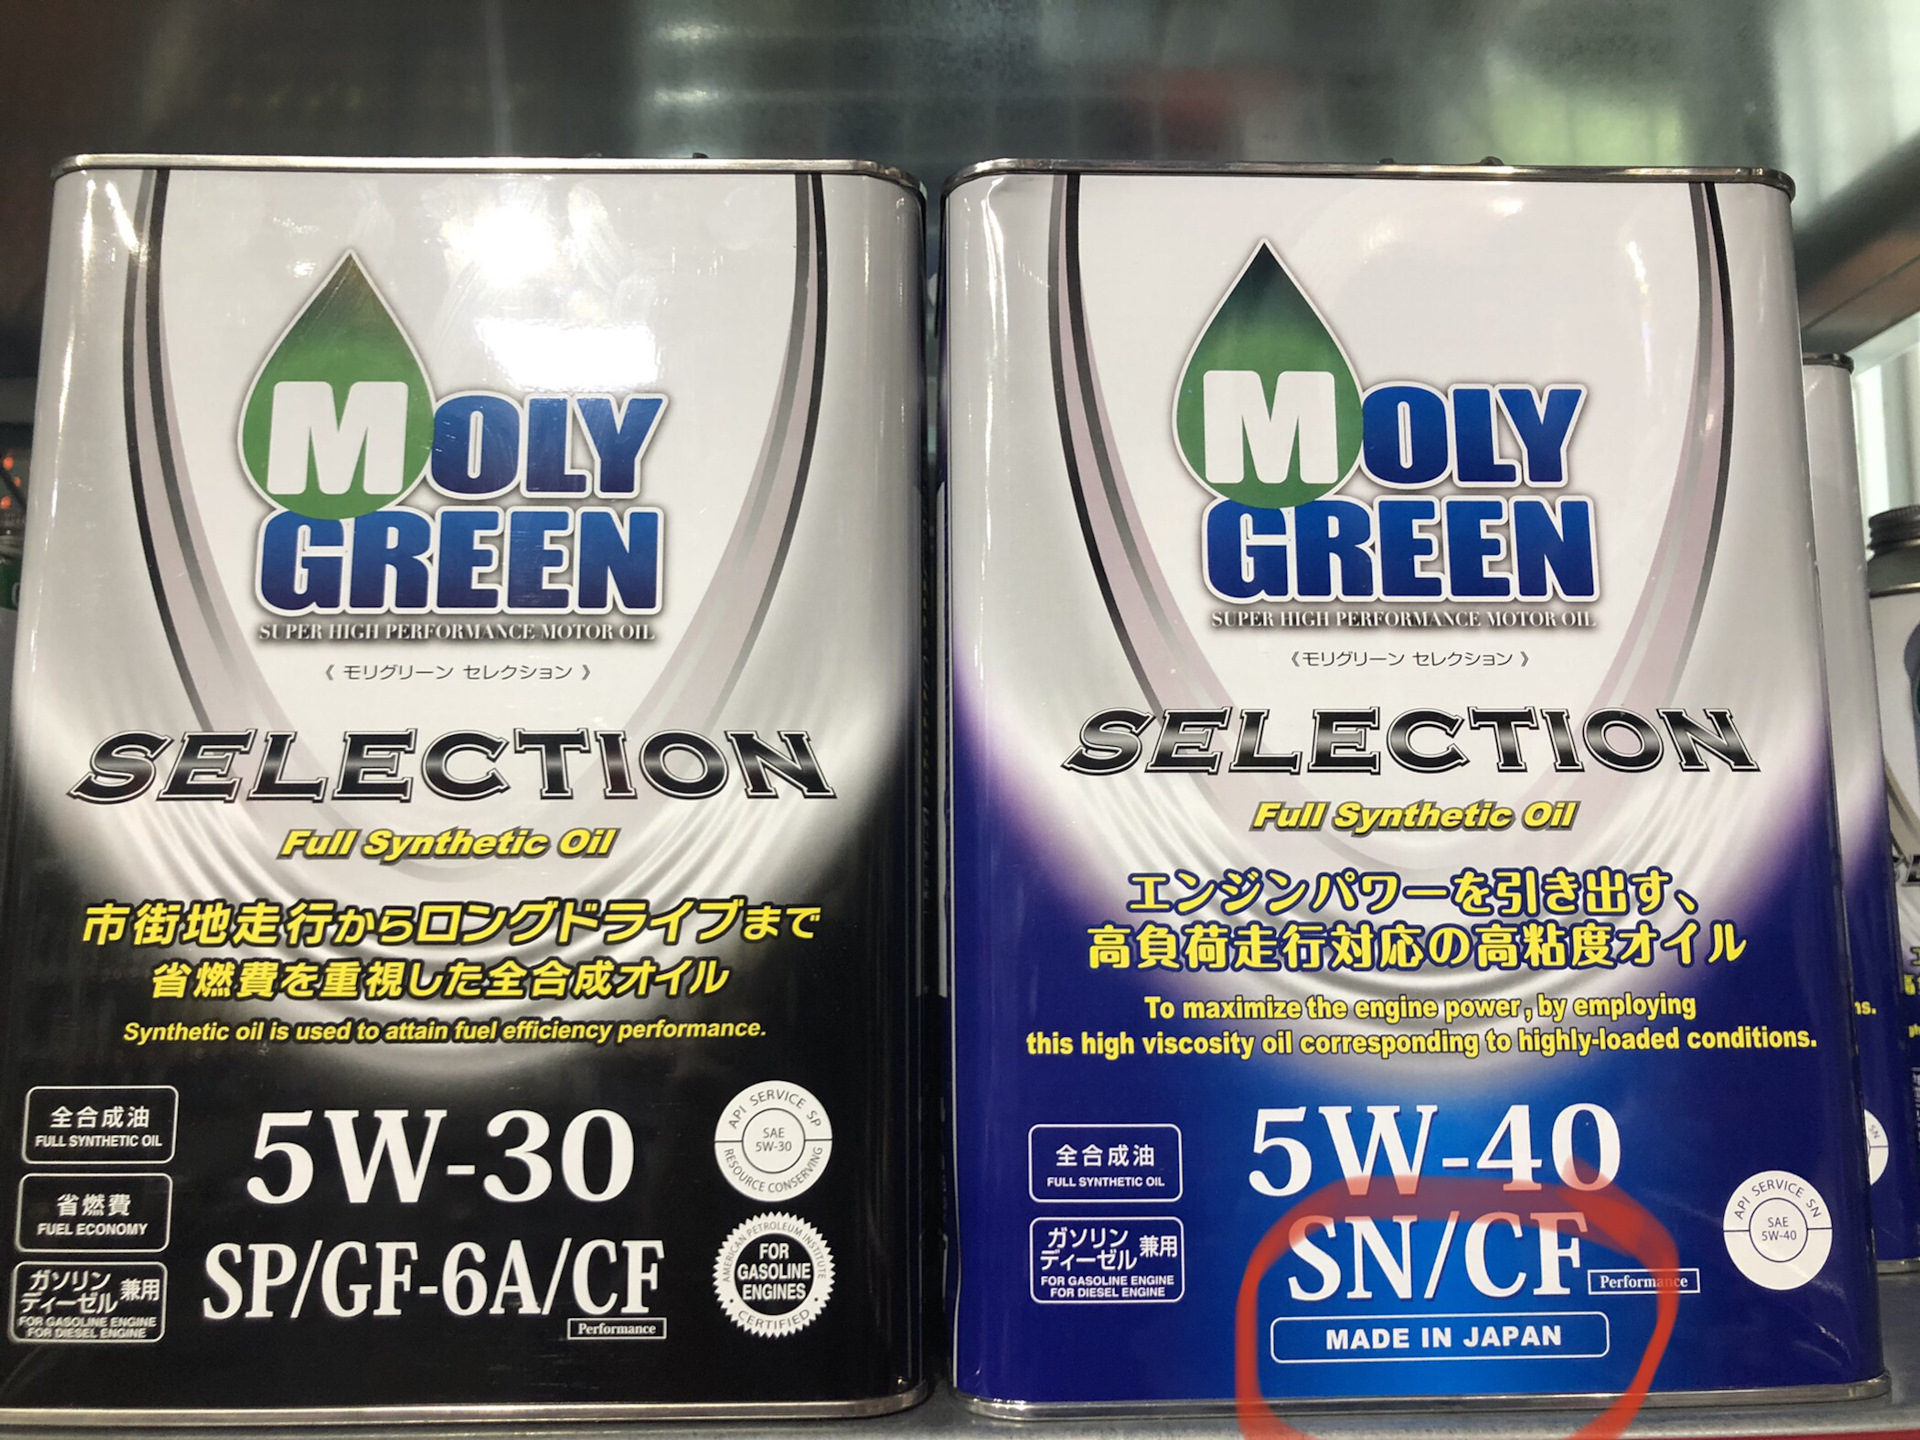 Moly green 5w40. Moly Green selection 5w40. Moly Green 5w30 selection. Моторное масло 5w30 Molly Green selection. Moly Green selection 5w40 200л.